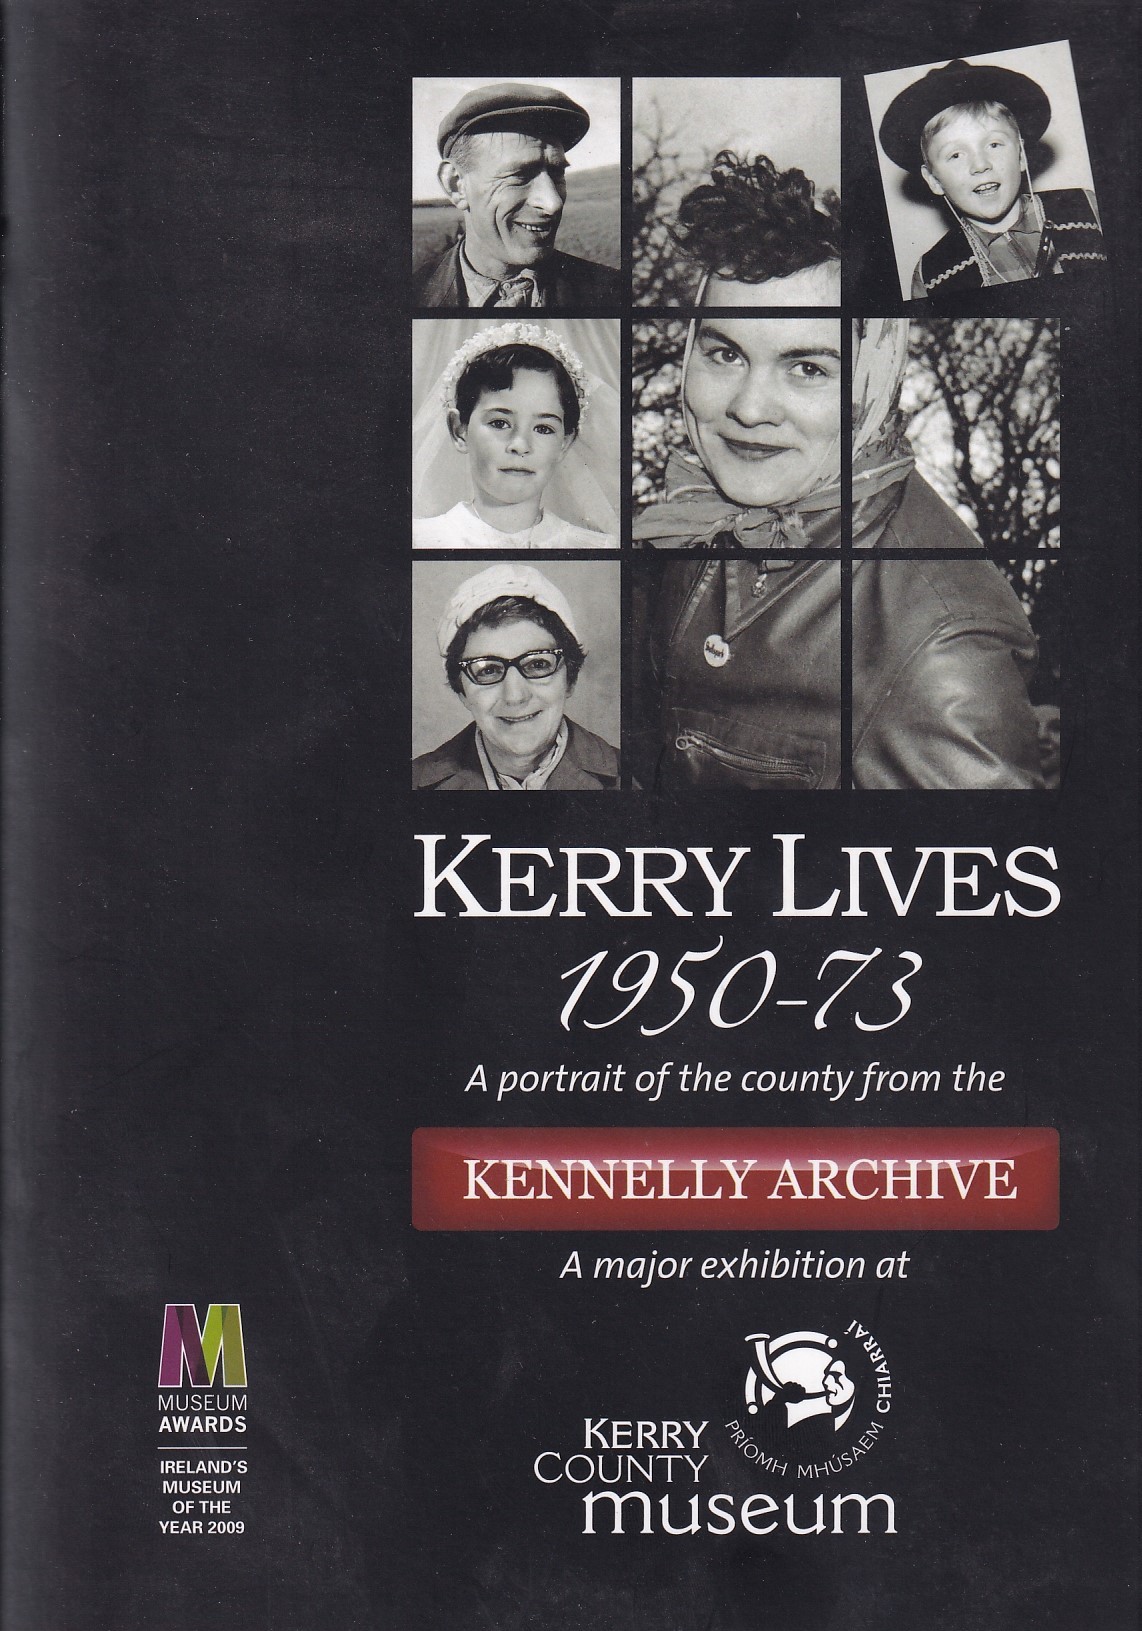 Kerry Lives 1950-73: A Portrait of the County from the Kennelly Archive (Catalogue) | Kerry County Museum | Charlie Byrne's